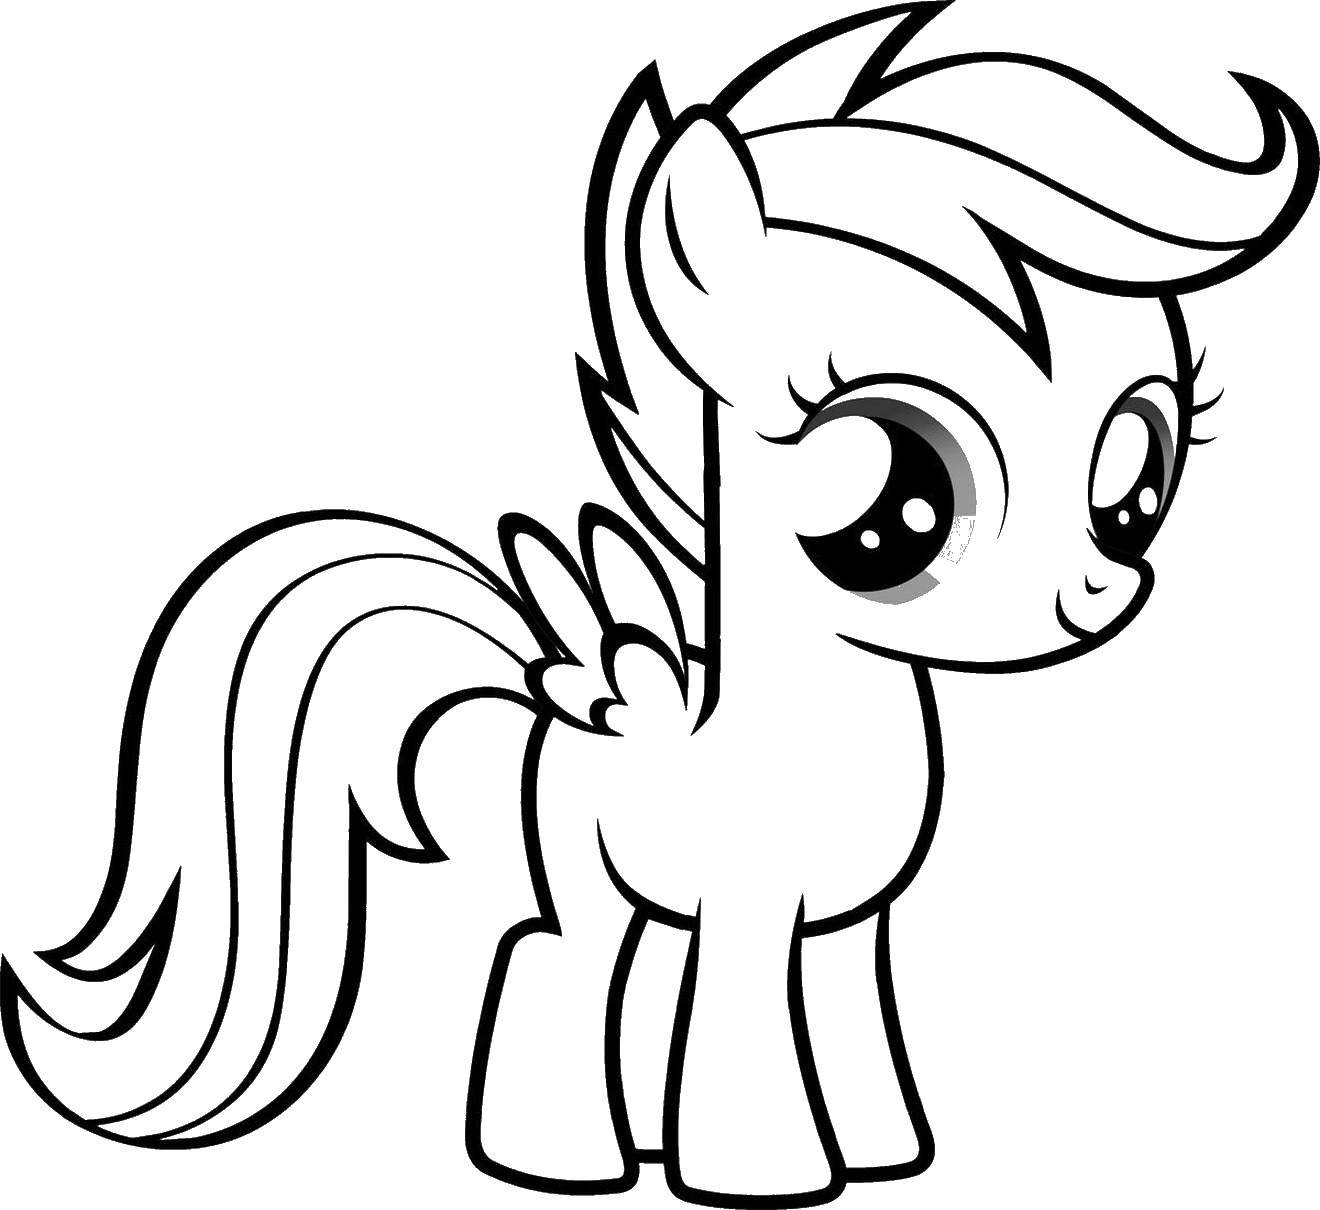 Coloring Pony scootaloo. Category my little pony. Tags:  scootaloo, ponies.